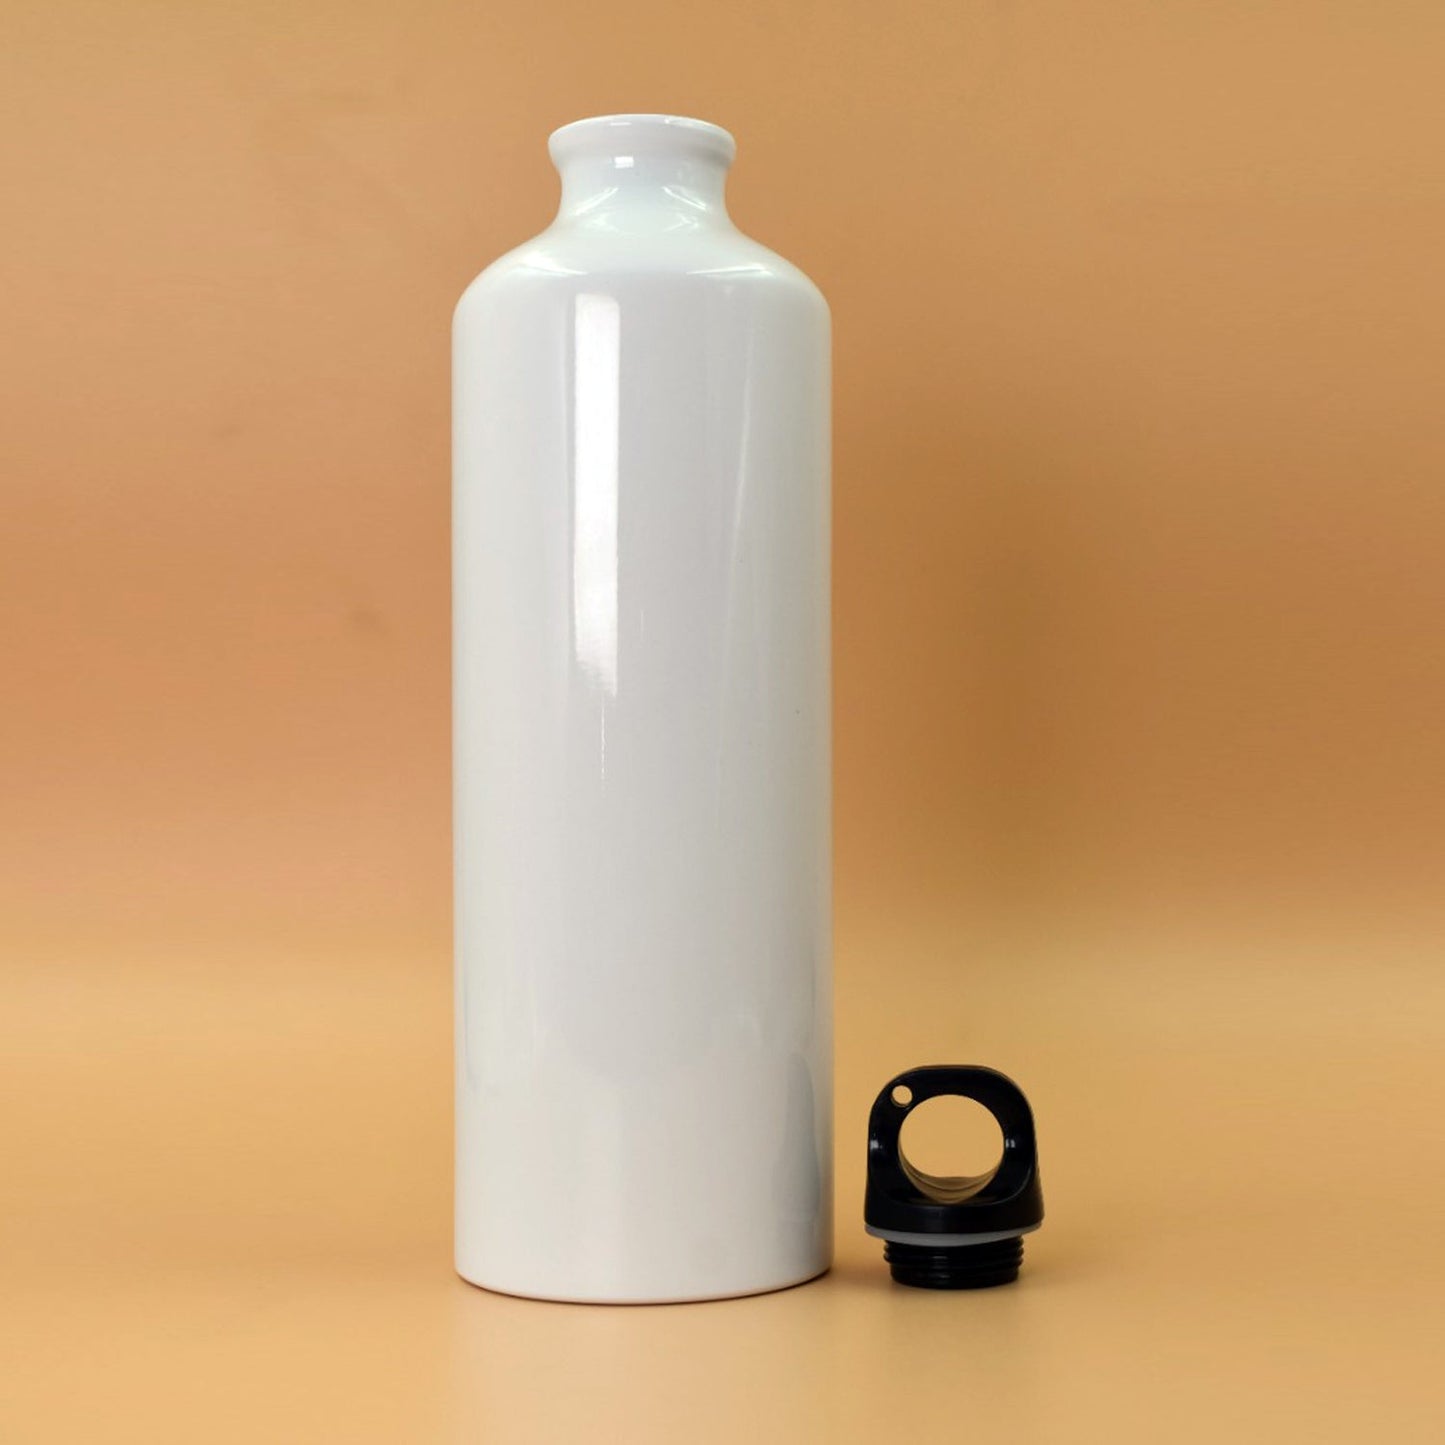 6083 CNB Bottle no.2 used in all kinds of places like household and official for storing and drinking water and some beverages etc. DeoDap